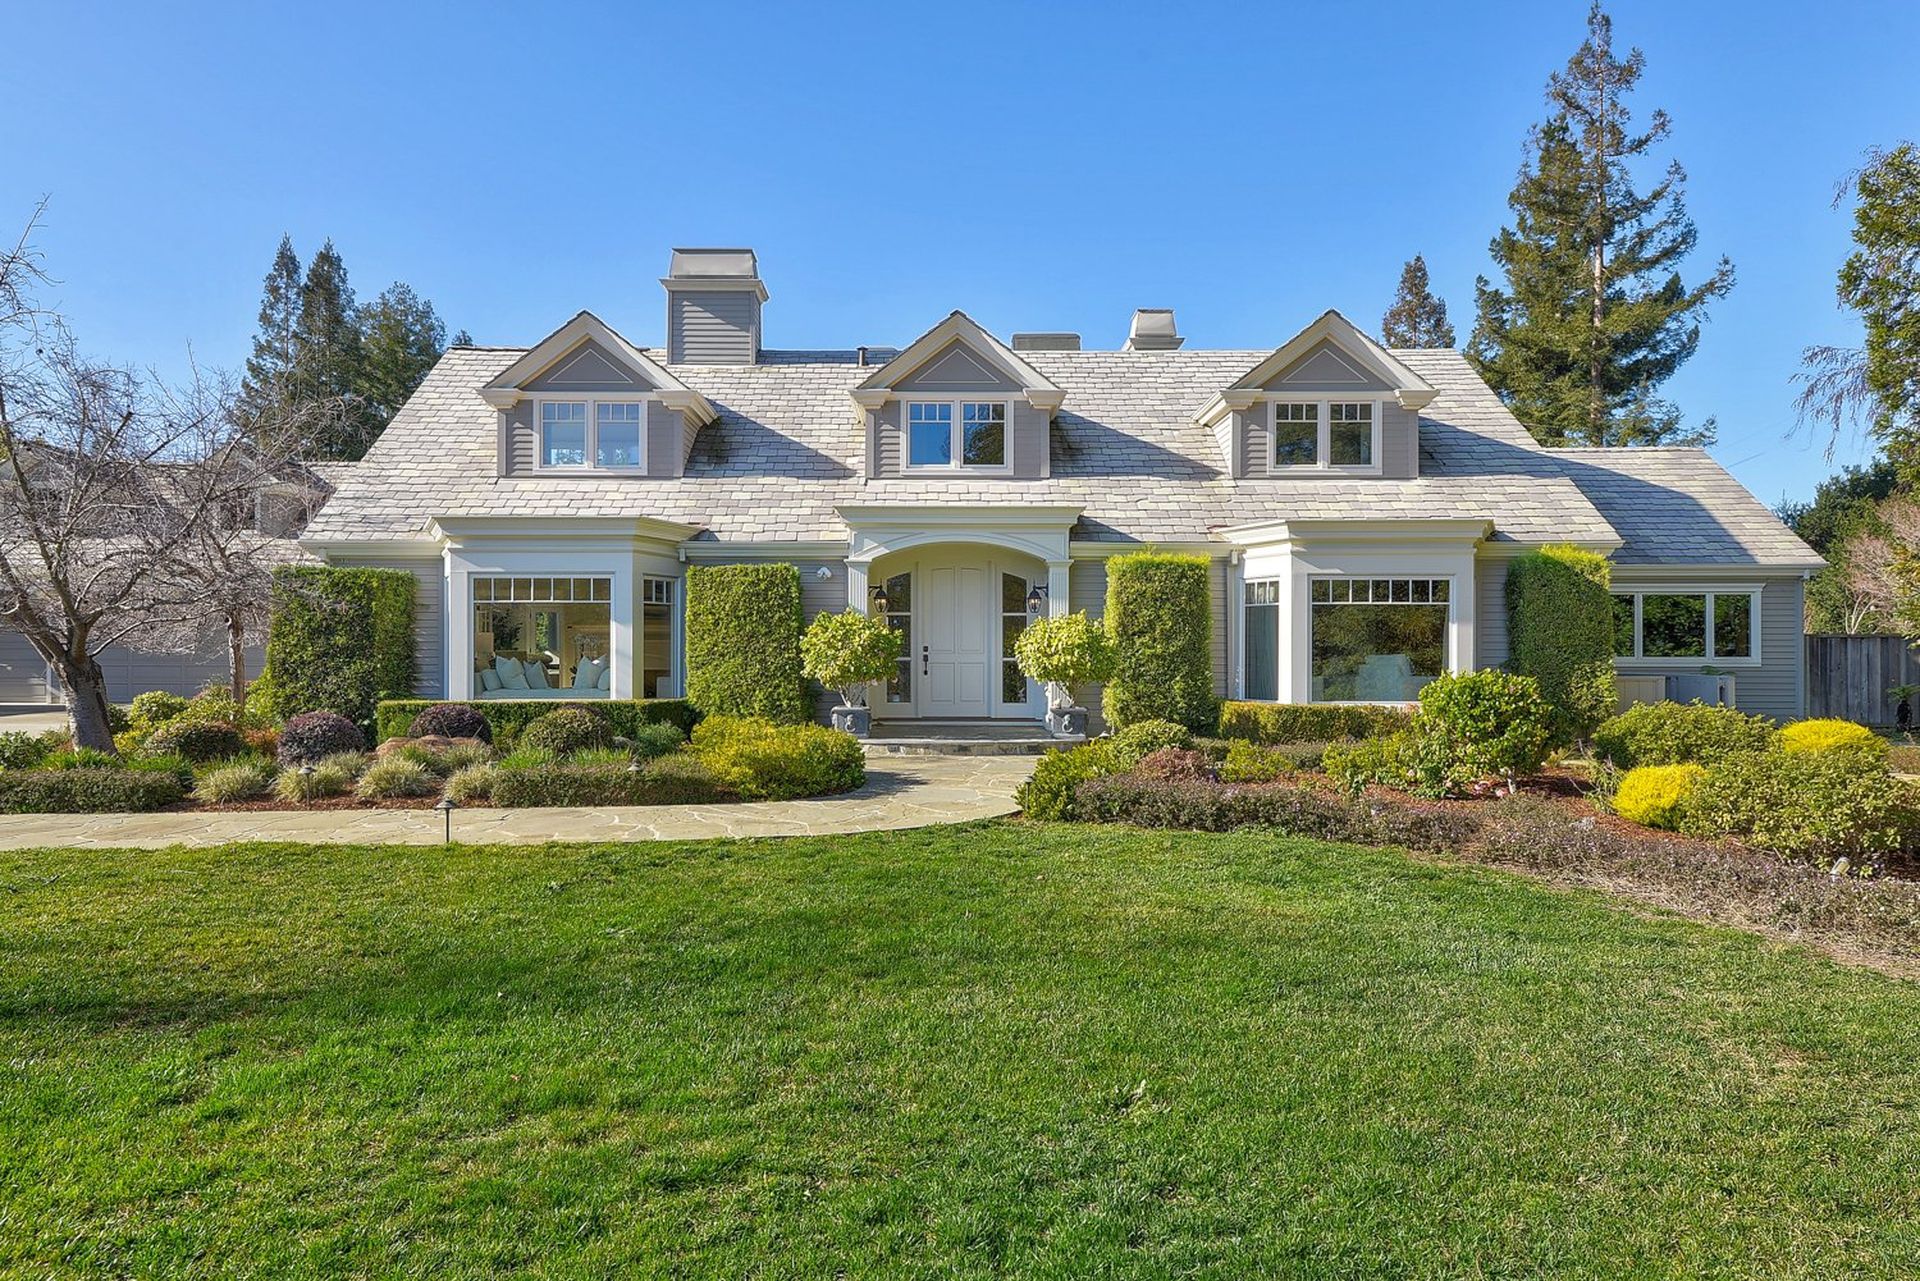 Impressive-Executive-Home-in-Los-Altos-Hills-with-Distinctive-Architecture-and-Luxe-Style-Asking-for-10998000-2